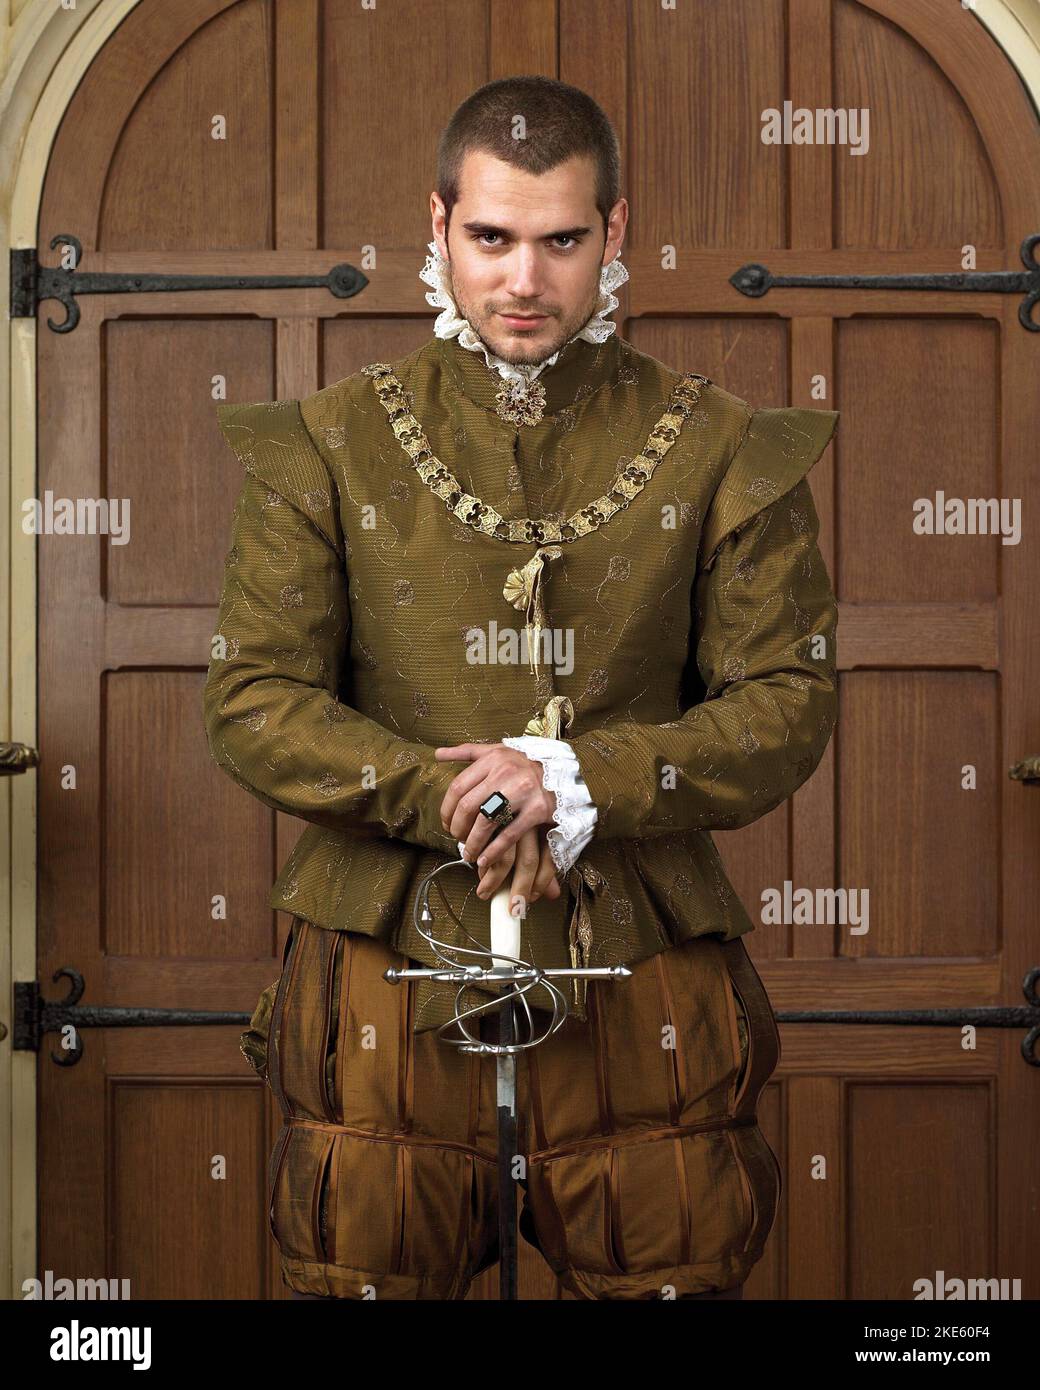 HENRY CAVILL in THE TUDORS (2007), directed by JEREMY PODESWA, MICHAEL HIRST, STEVE SHILL and CIARAN DONNELLY. Credit: BORD SCANNAN NA HEIREANN/CANADIAN BROADCASTING CORP./ Album Stock Photo